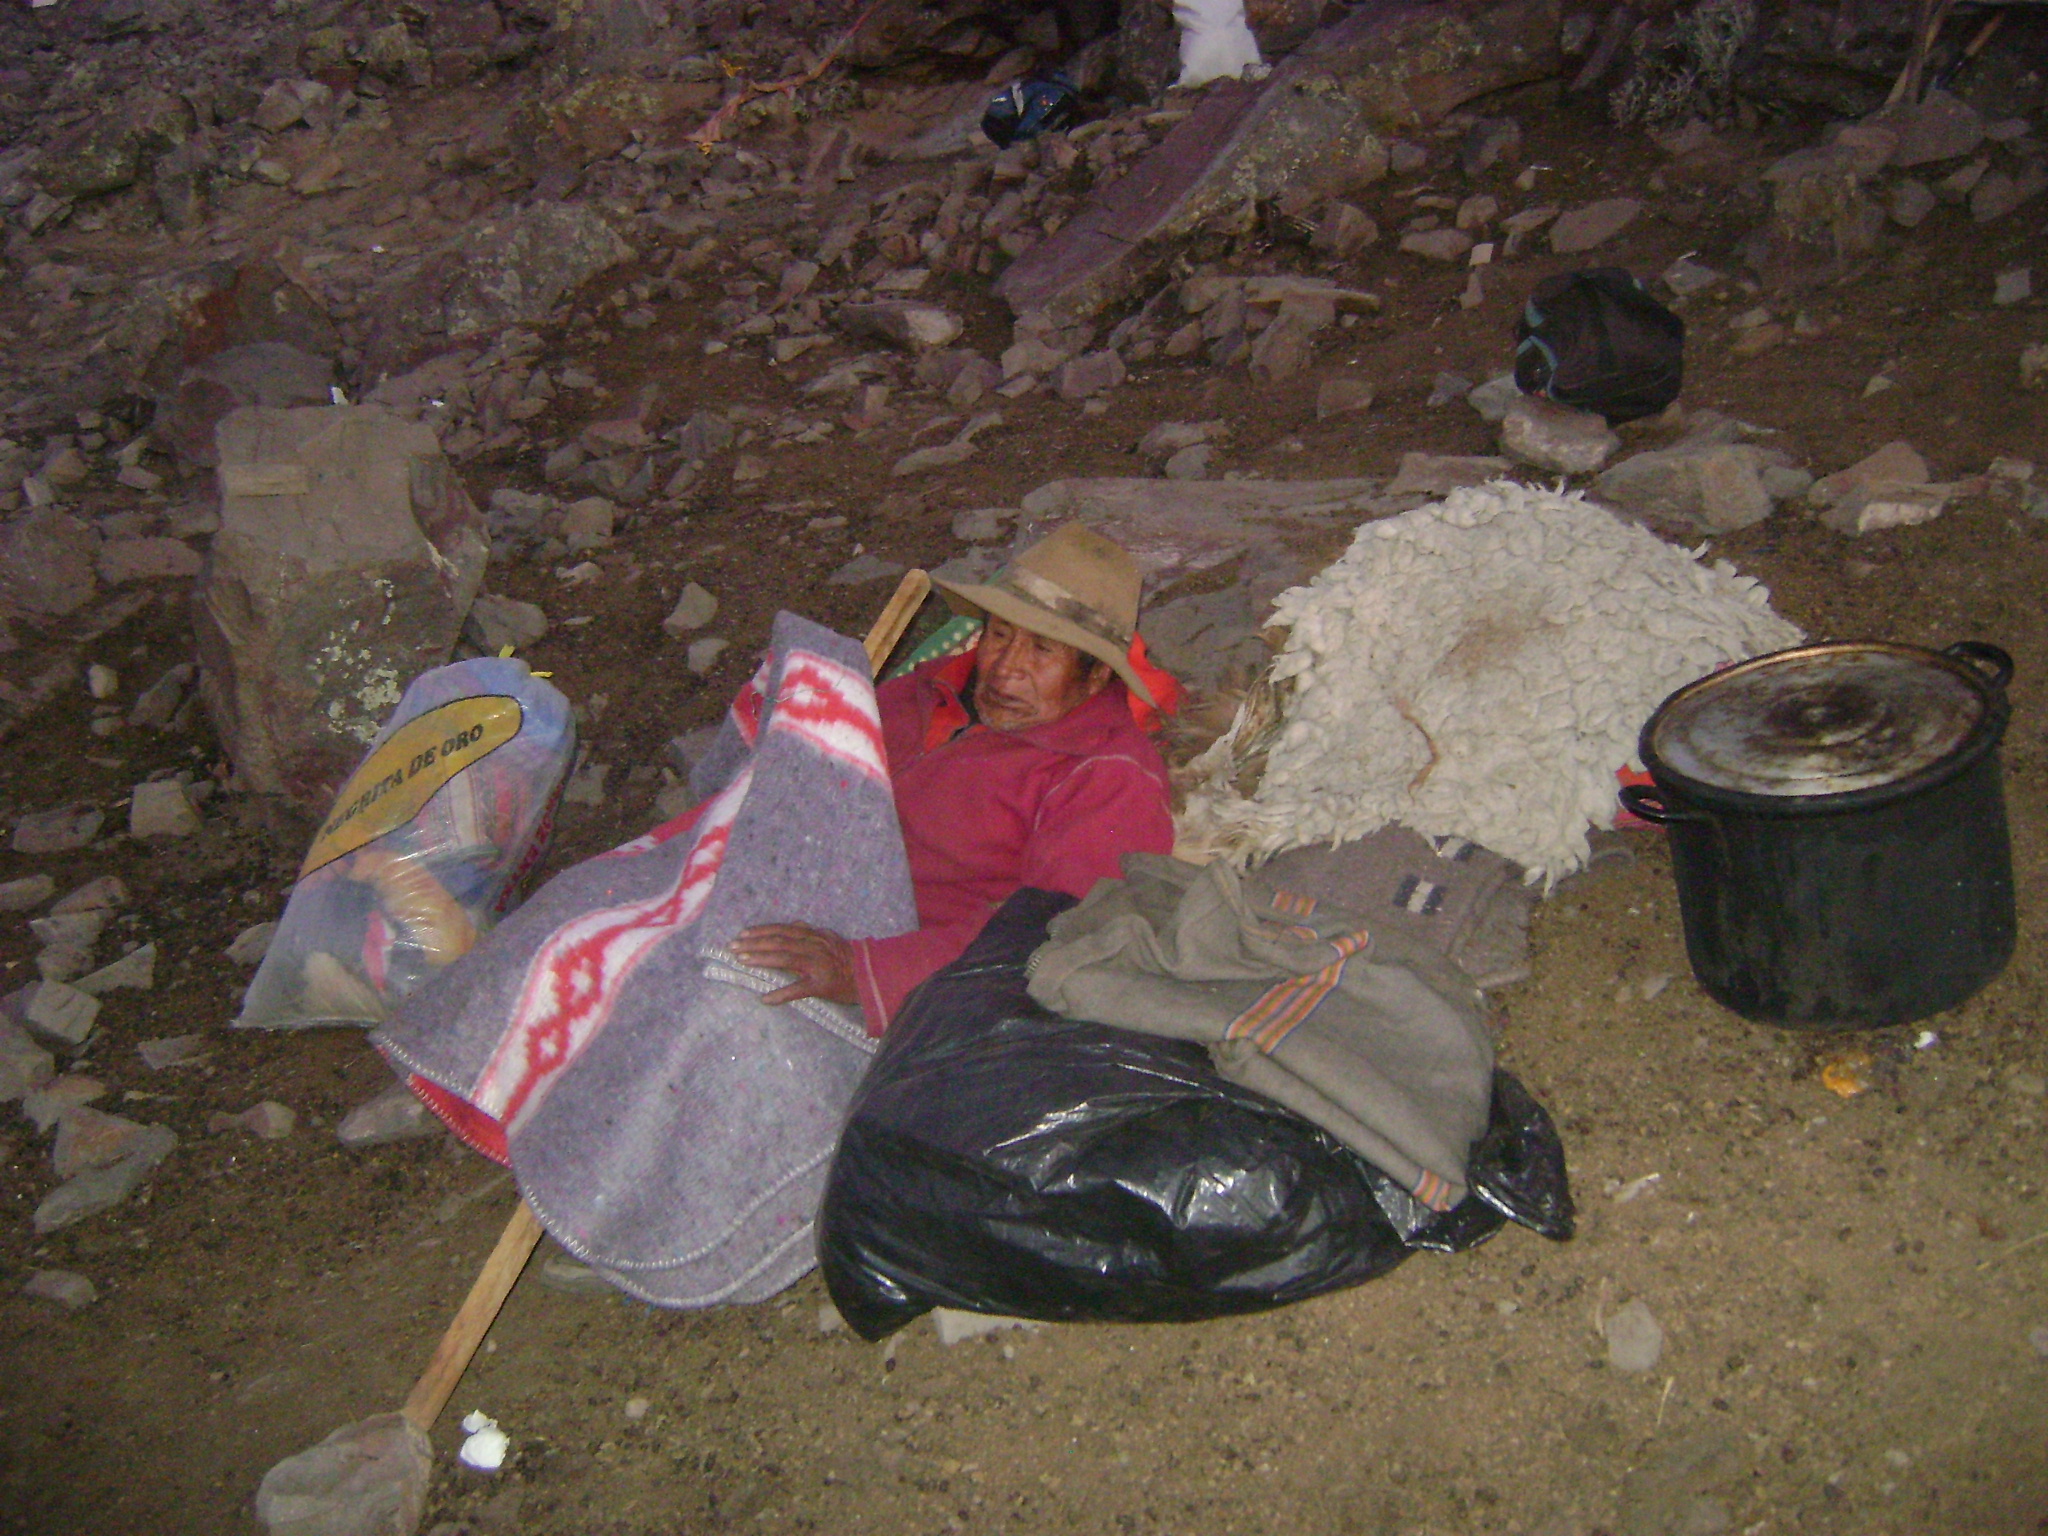 Aftermath of Casma Palla Palla resident without a home after Suyamarca Mining ransacked and destroyed their homes.